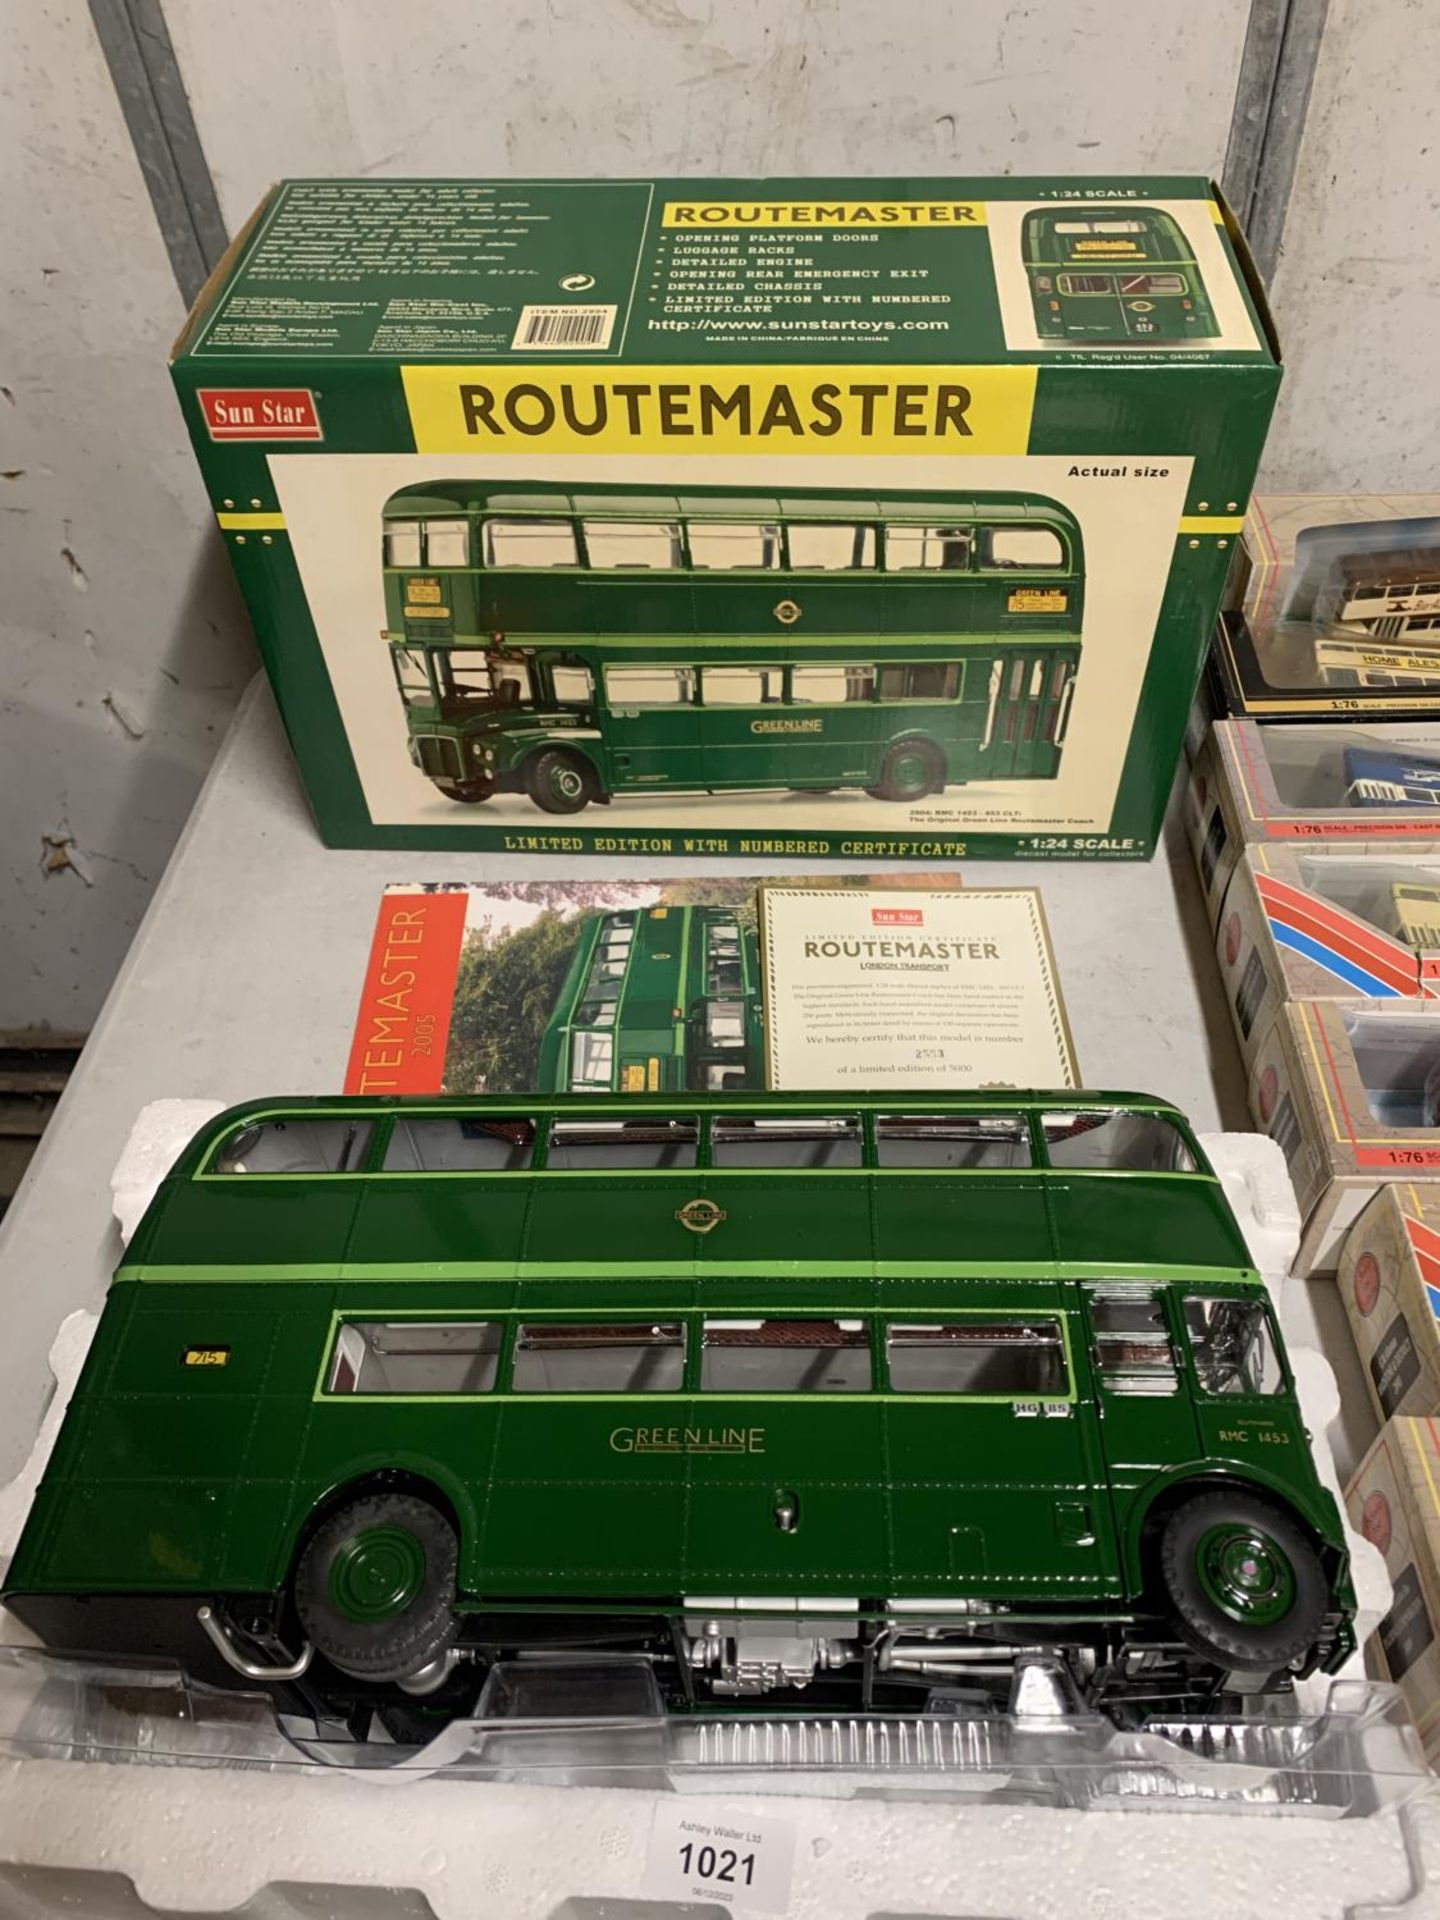 A SUN STAR ROUTEMASTER GREENLINE LIMITED EDITION BUS, 1:24 SCALE - AS NEW IN BOX, WITH NUMBERED